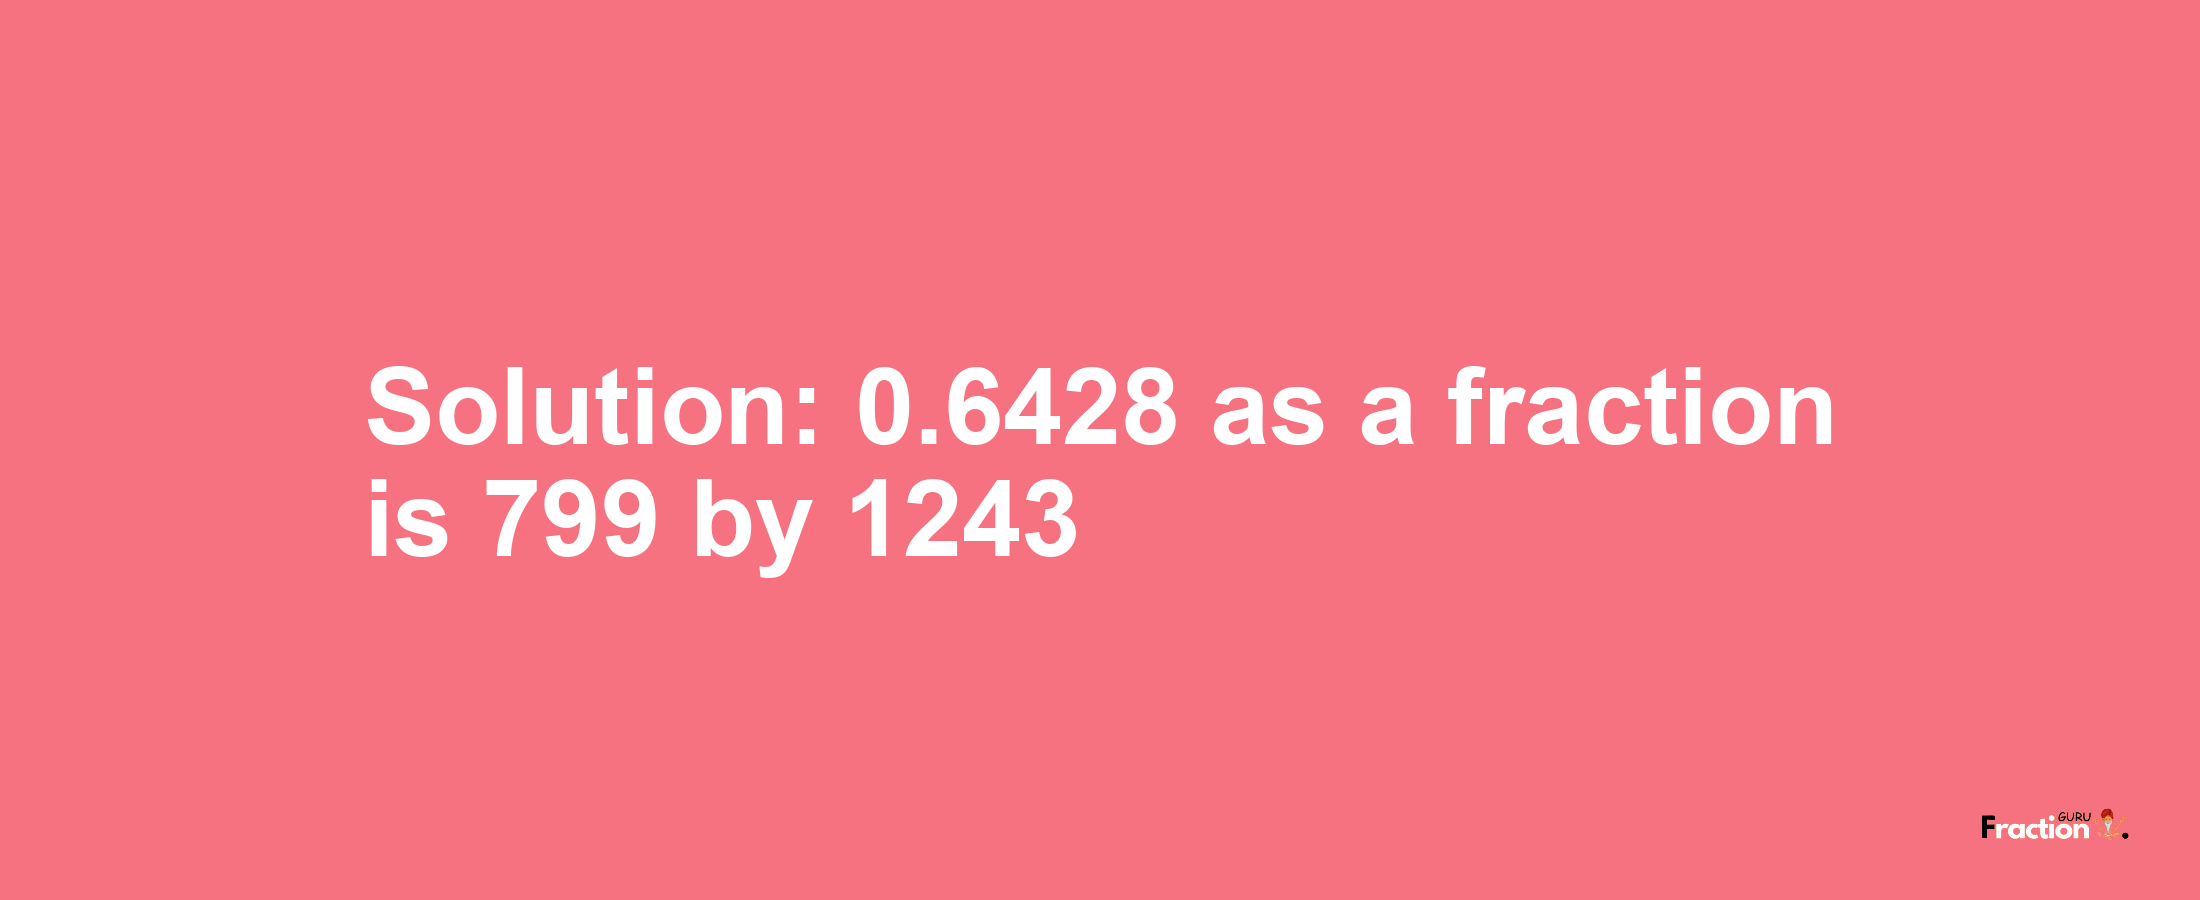 Solution:0.6428 as a fraction is 799/1243